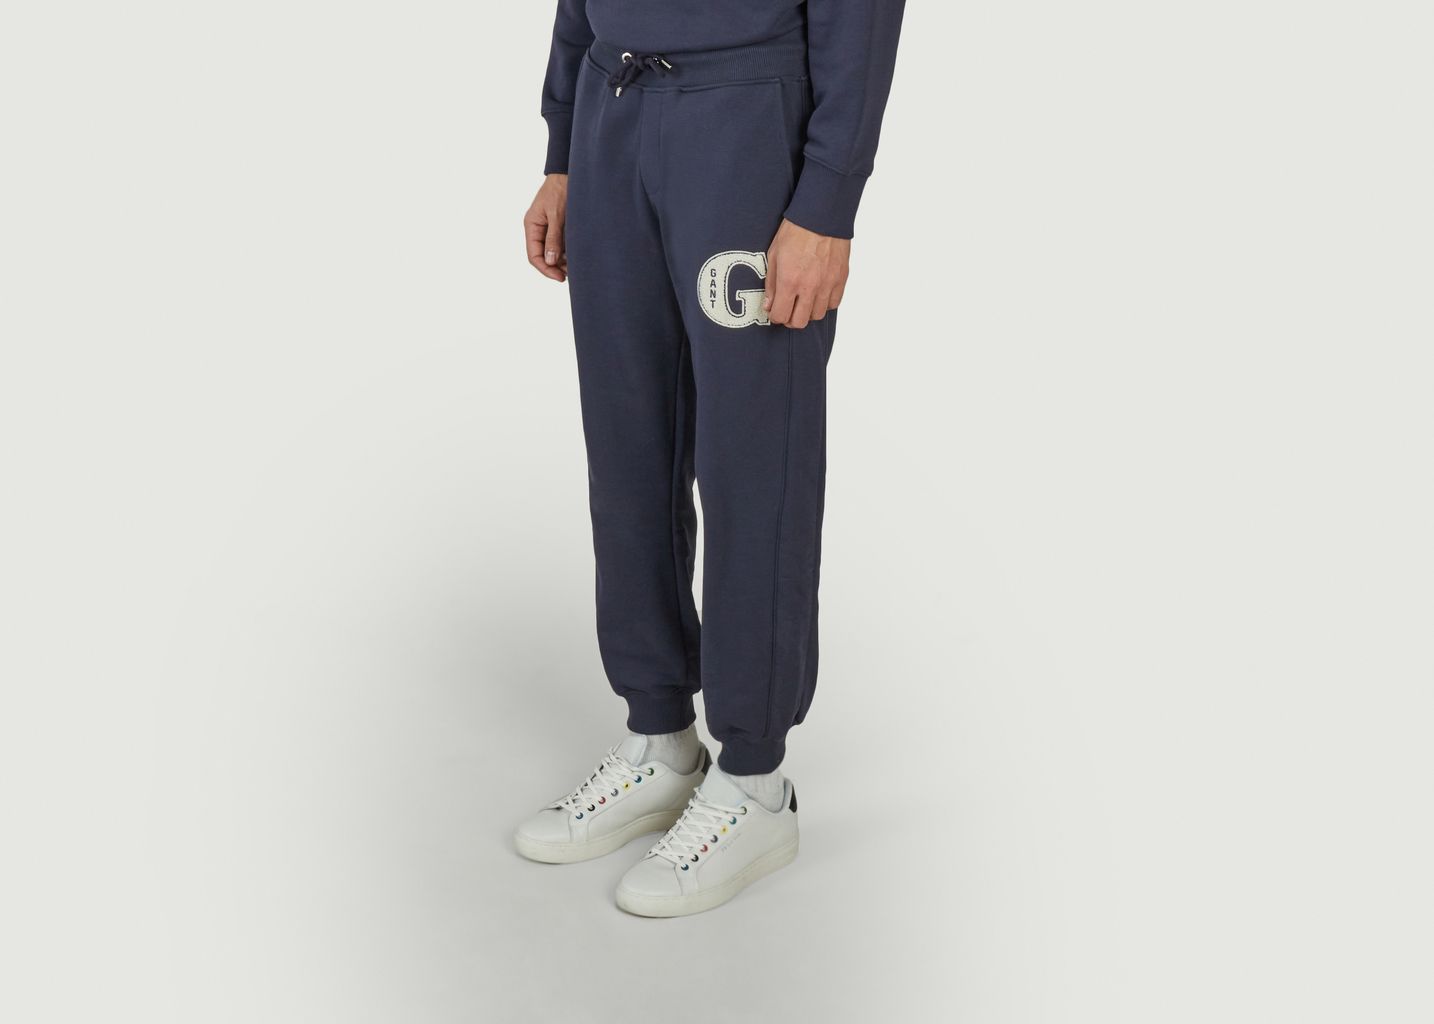 Graphic G trousers - Gant